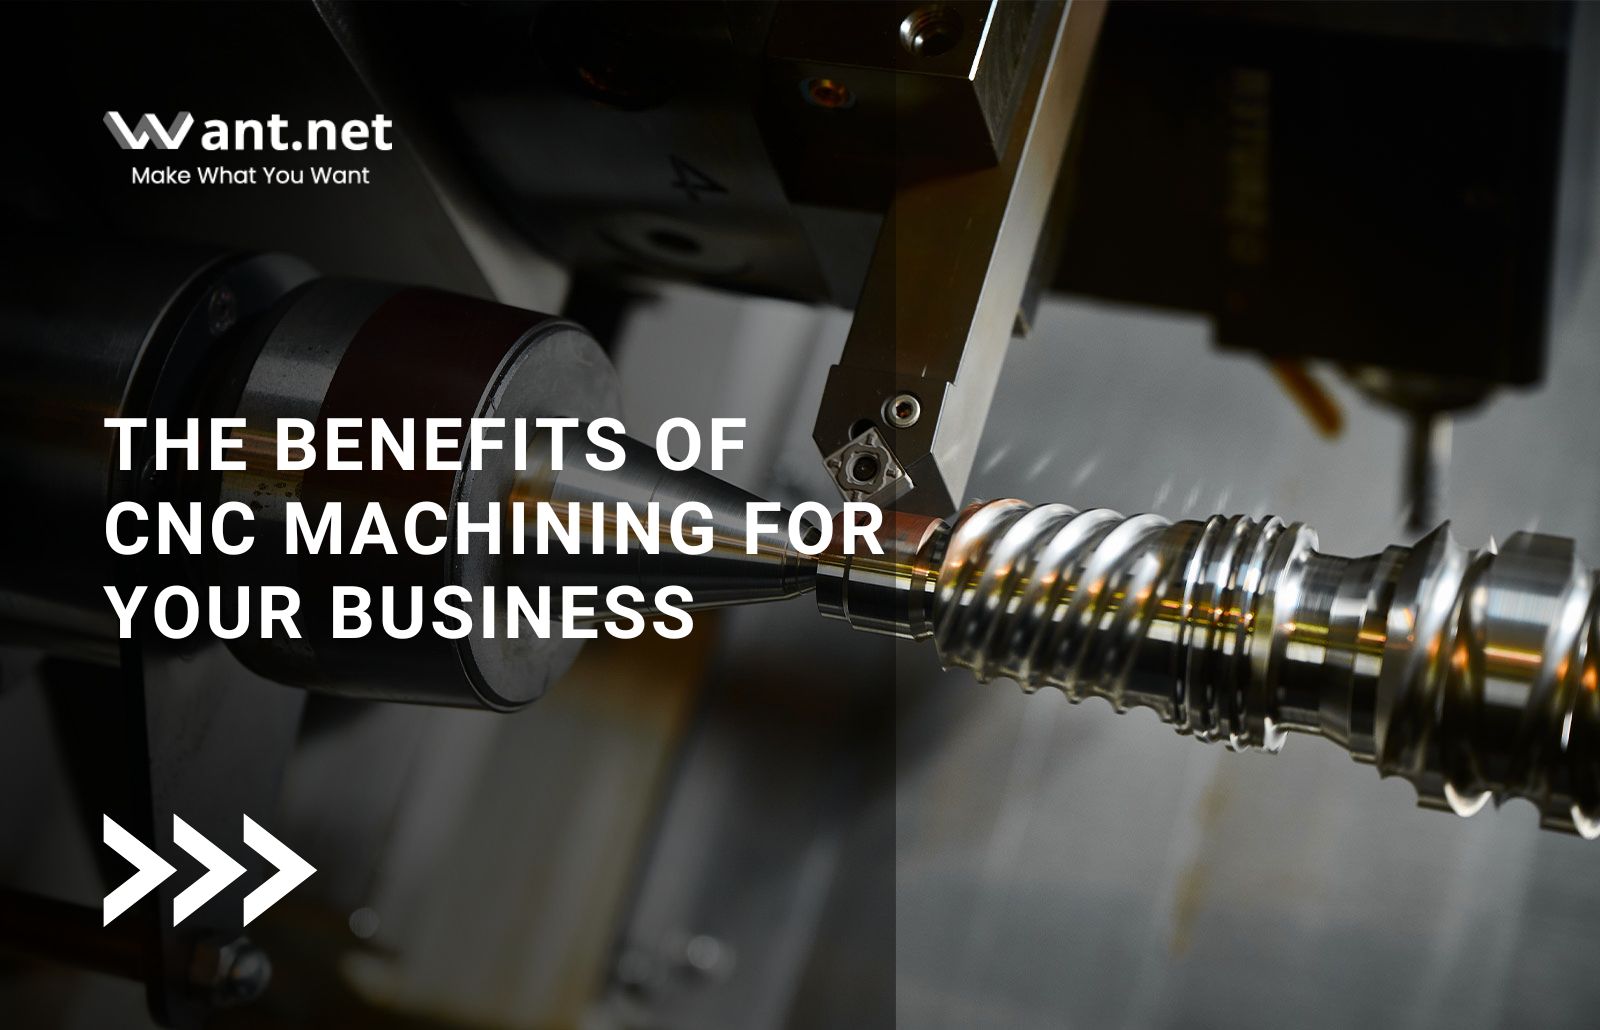 The Benefits of CNC Machining for Your Business